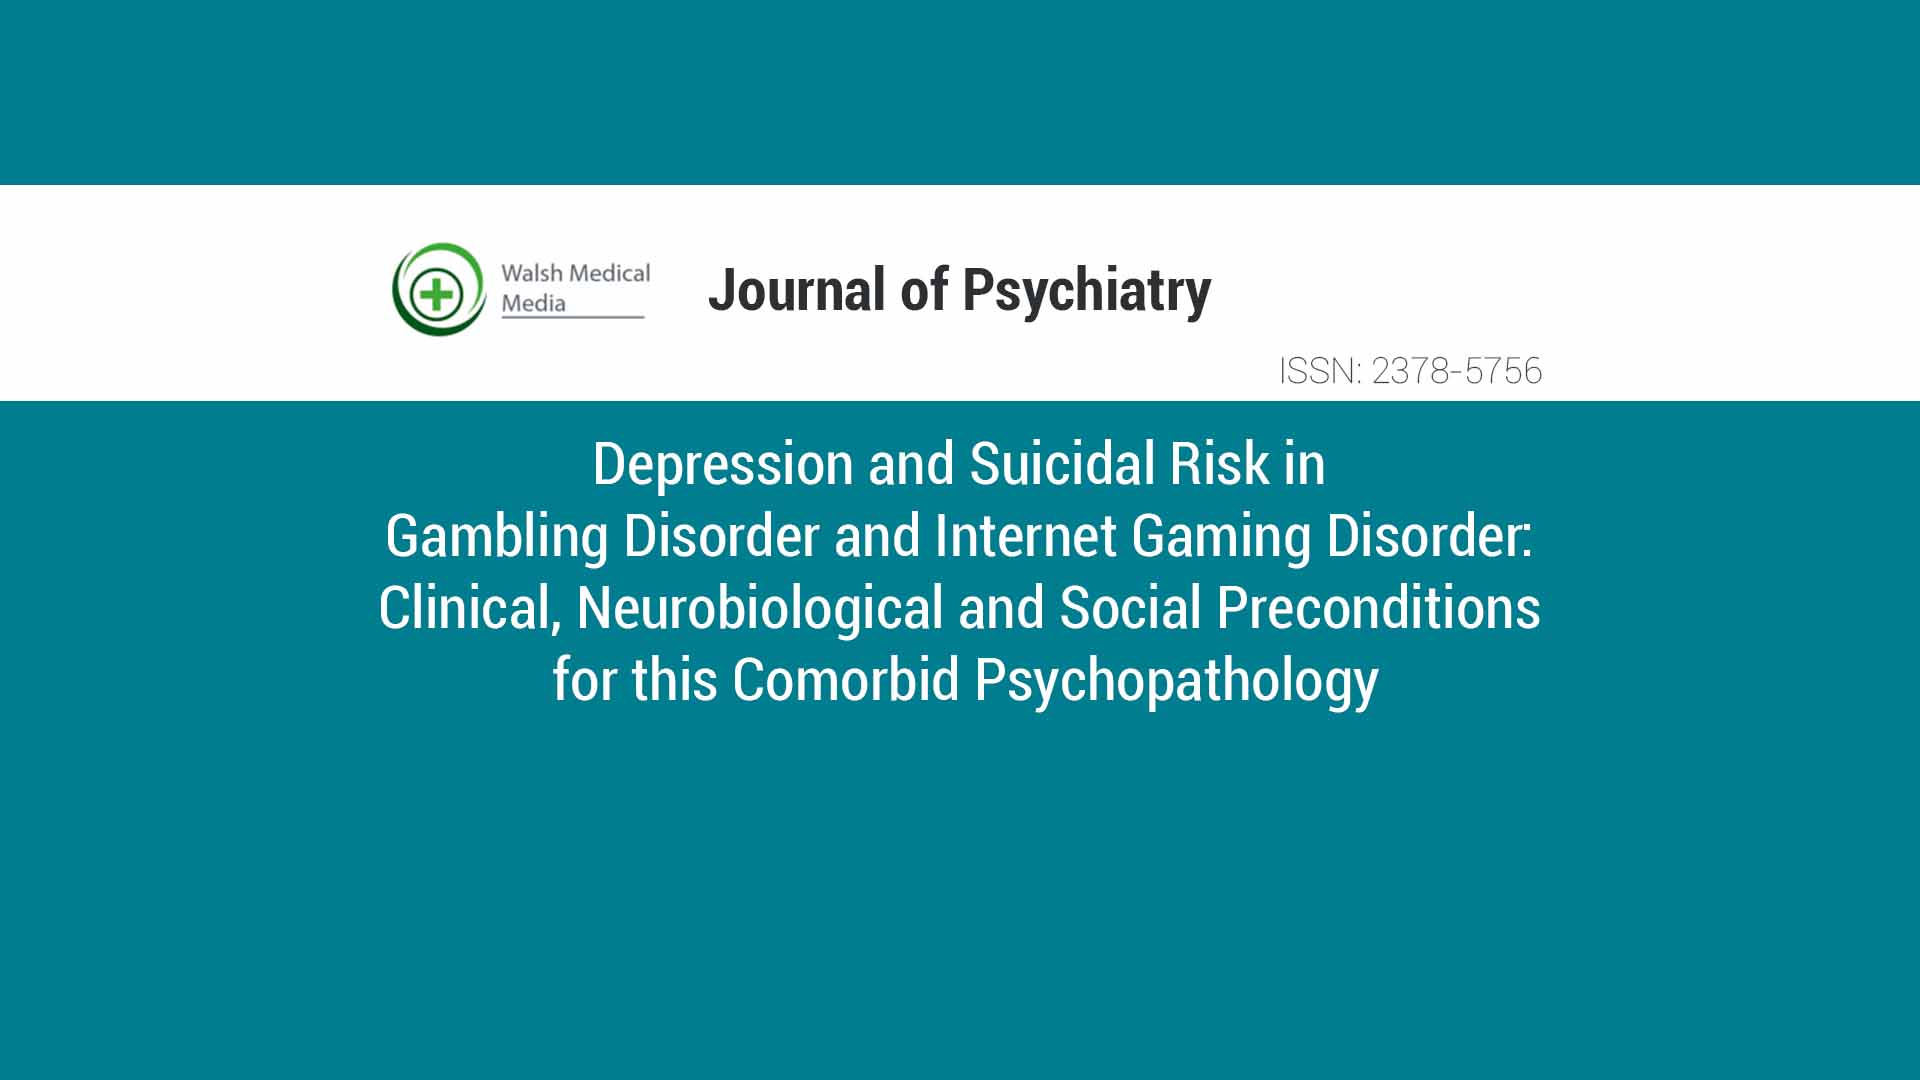 Depression and suicidal risk in GD and IGD. Clinical, neurobiological and social preconditions for this comorbid psychopathology